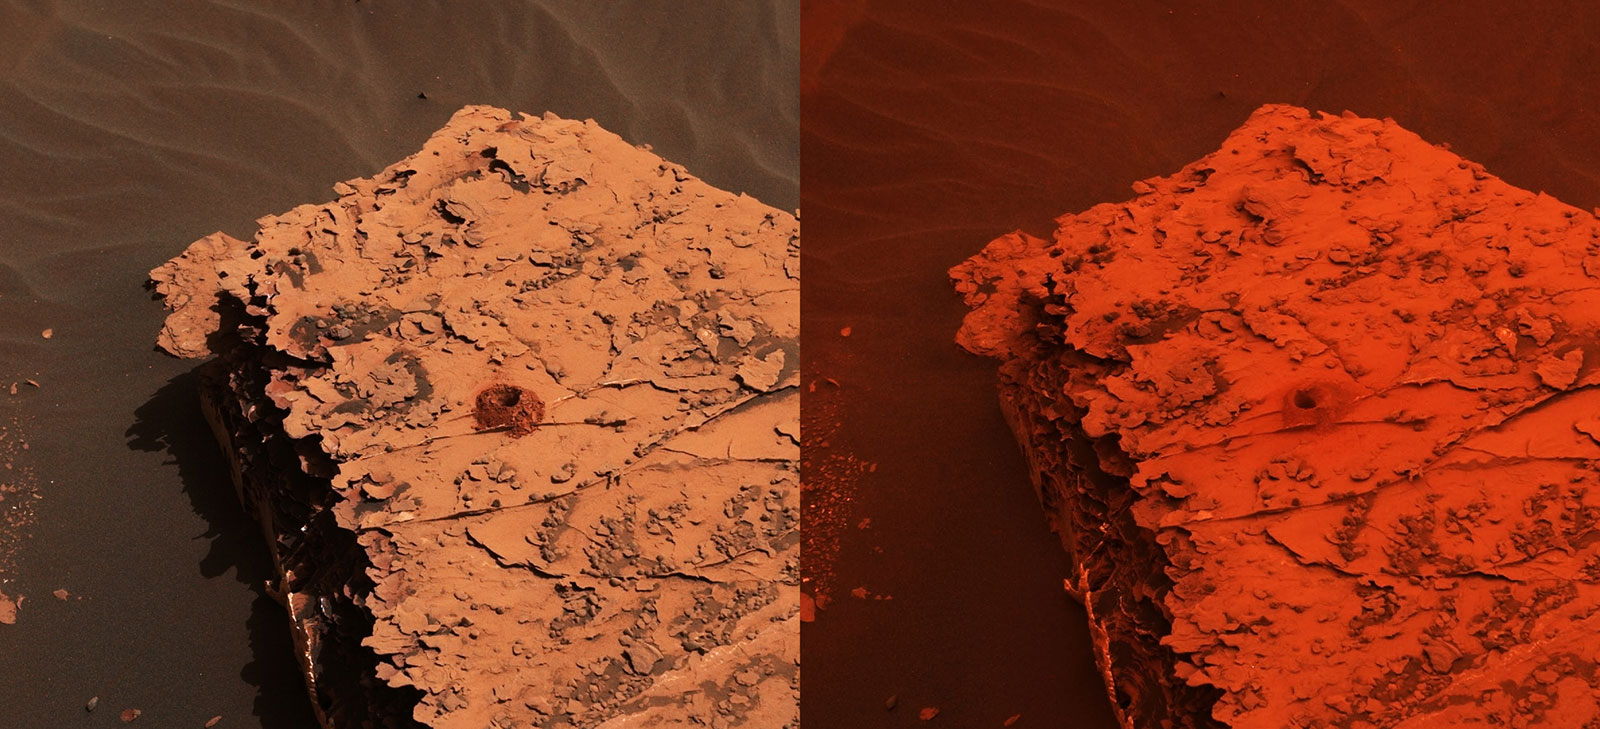 change in the color of light illuminating the Martian surface